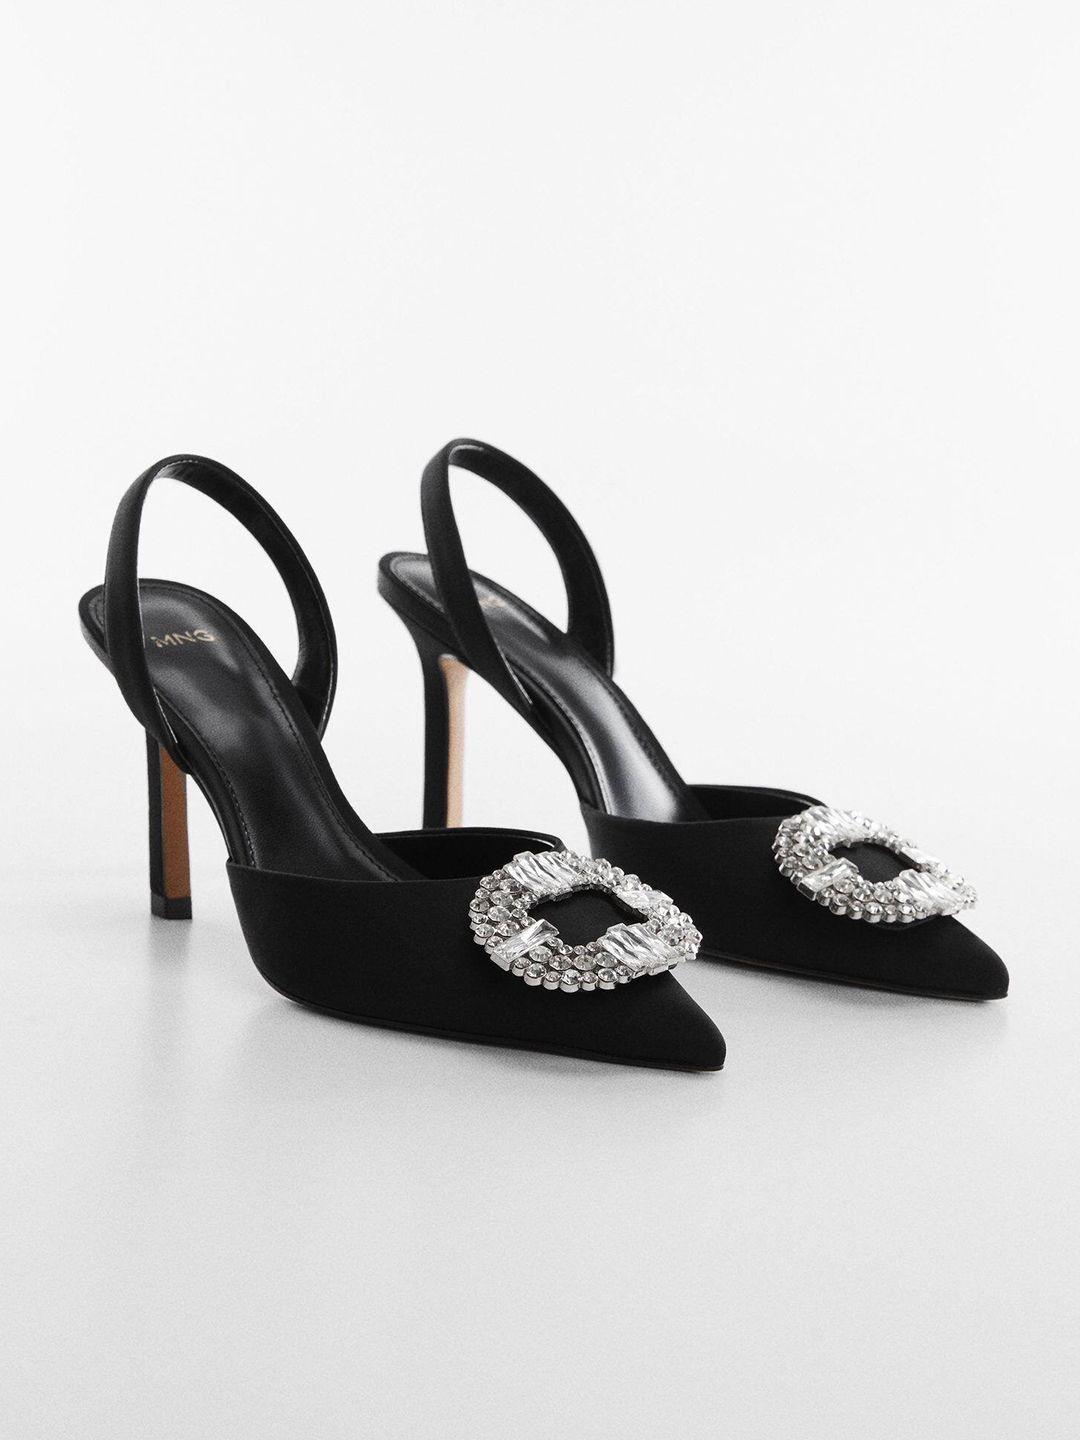 mango party stiletto pumps woith embellished buckle detail